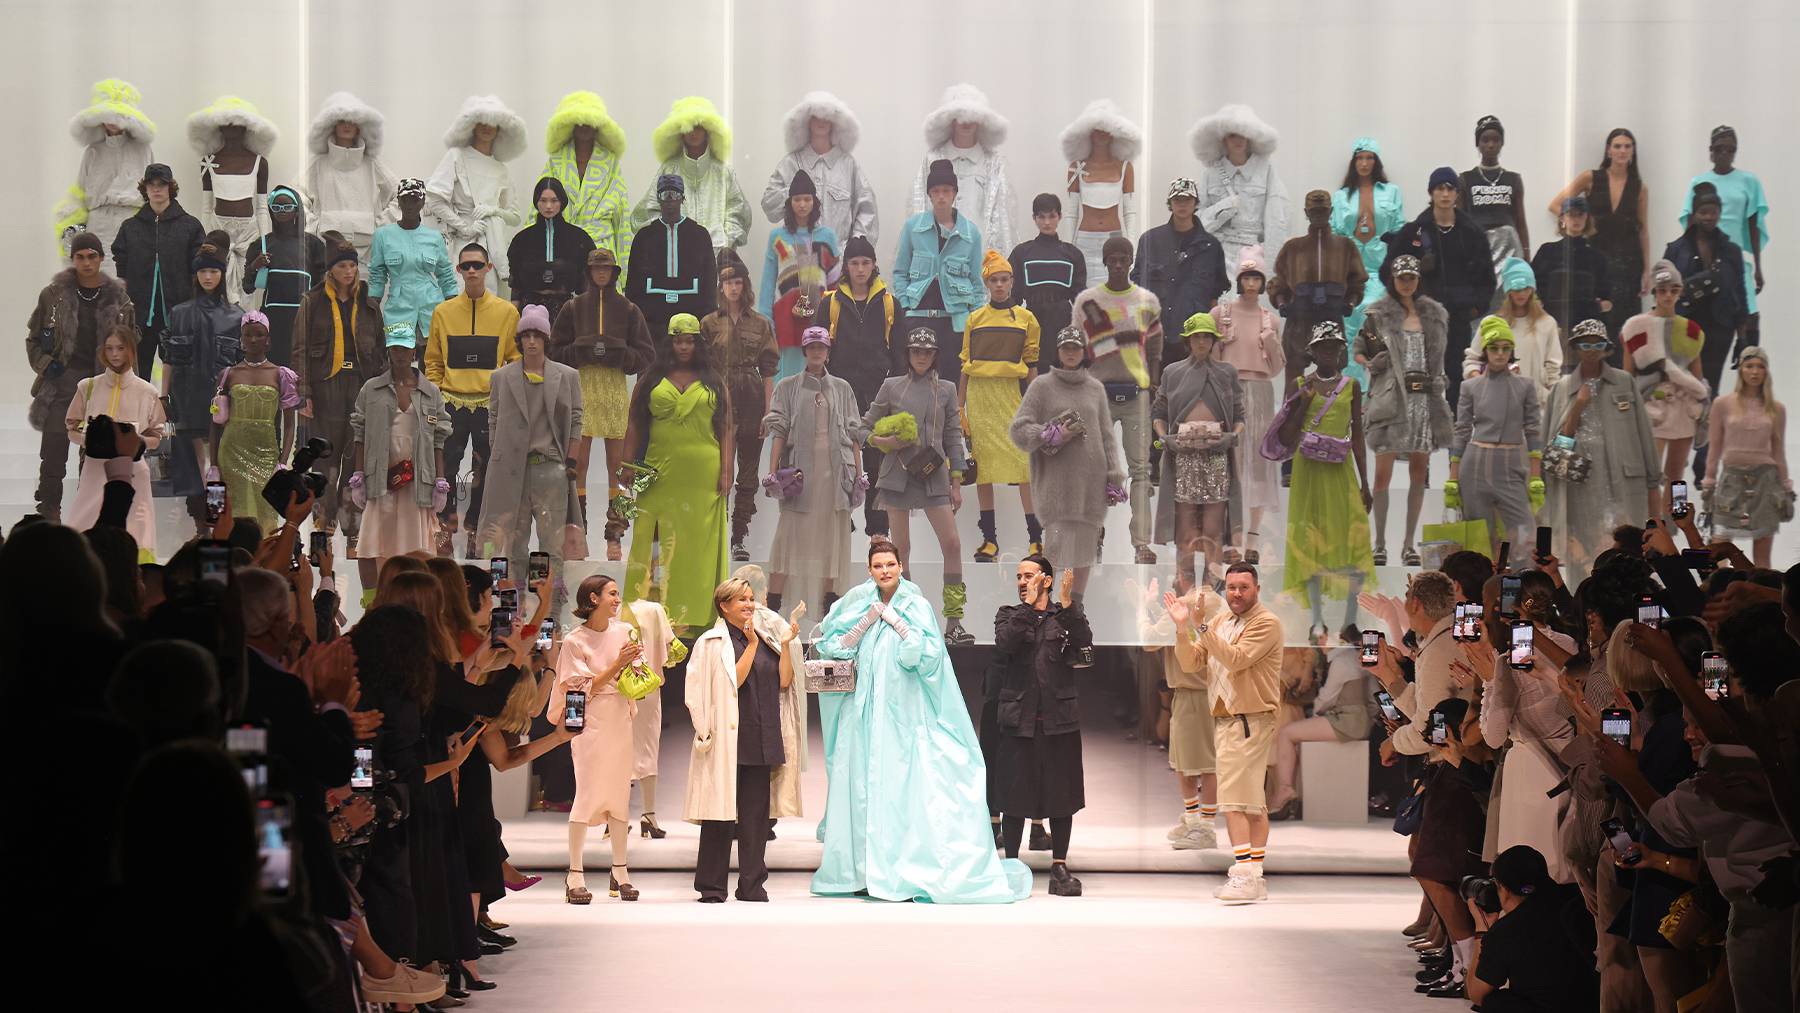 Fendi’s New York Fashion Week show celebrating its Baguette bag’s 25th anniversary doubled as a marketing platform for parent company LVMH’s American brands Marc Jacobs and Tiffany.